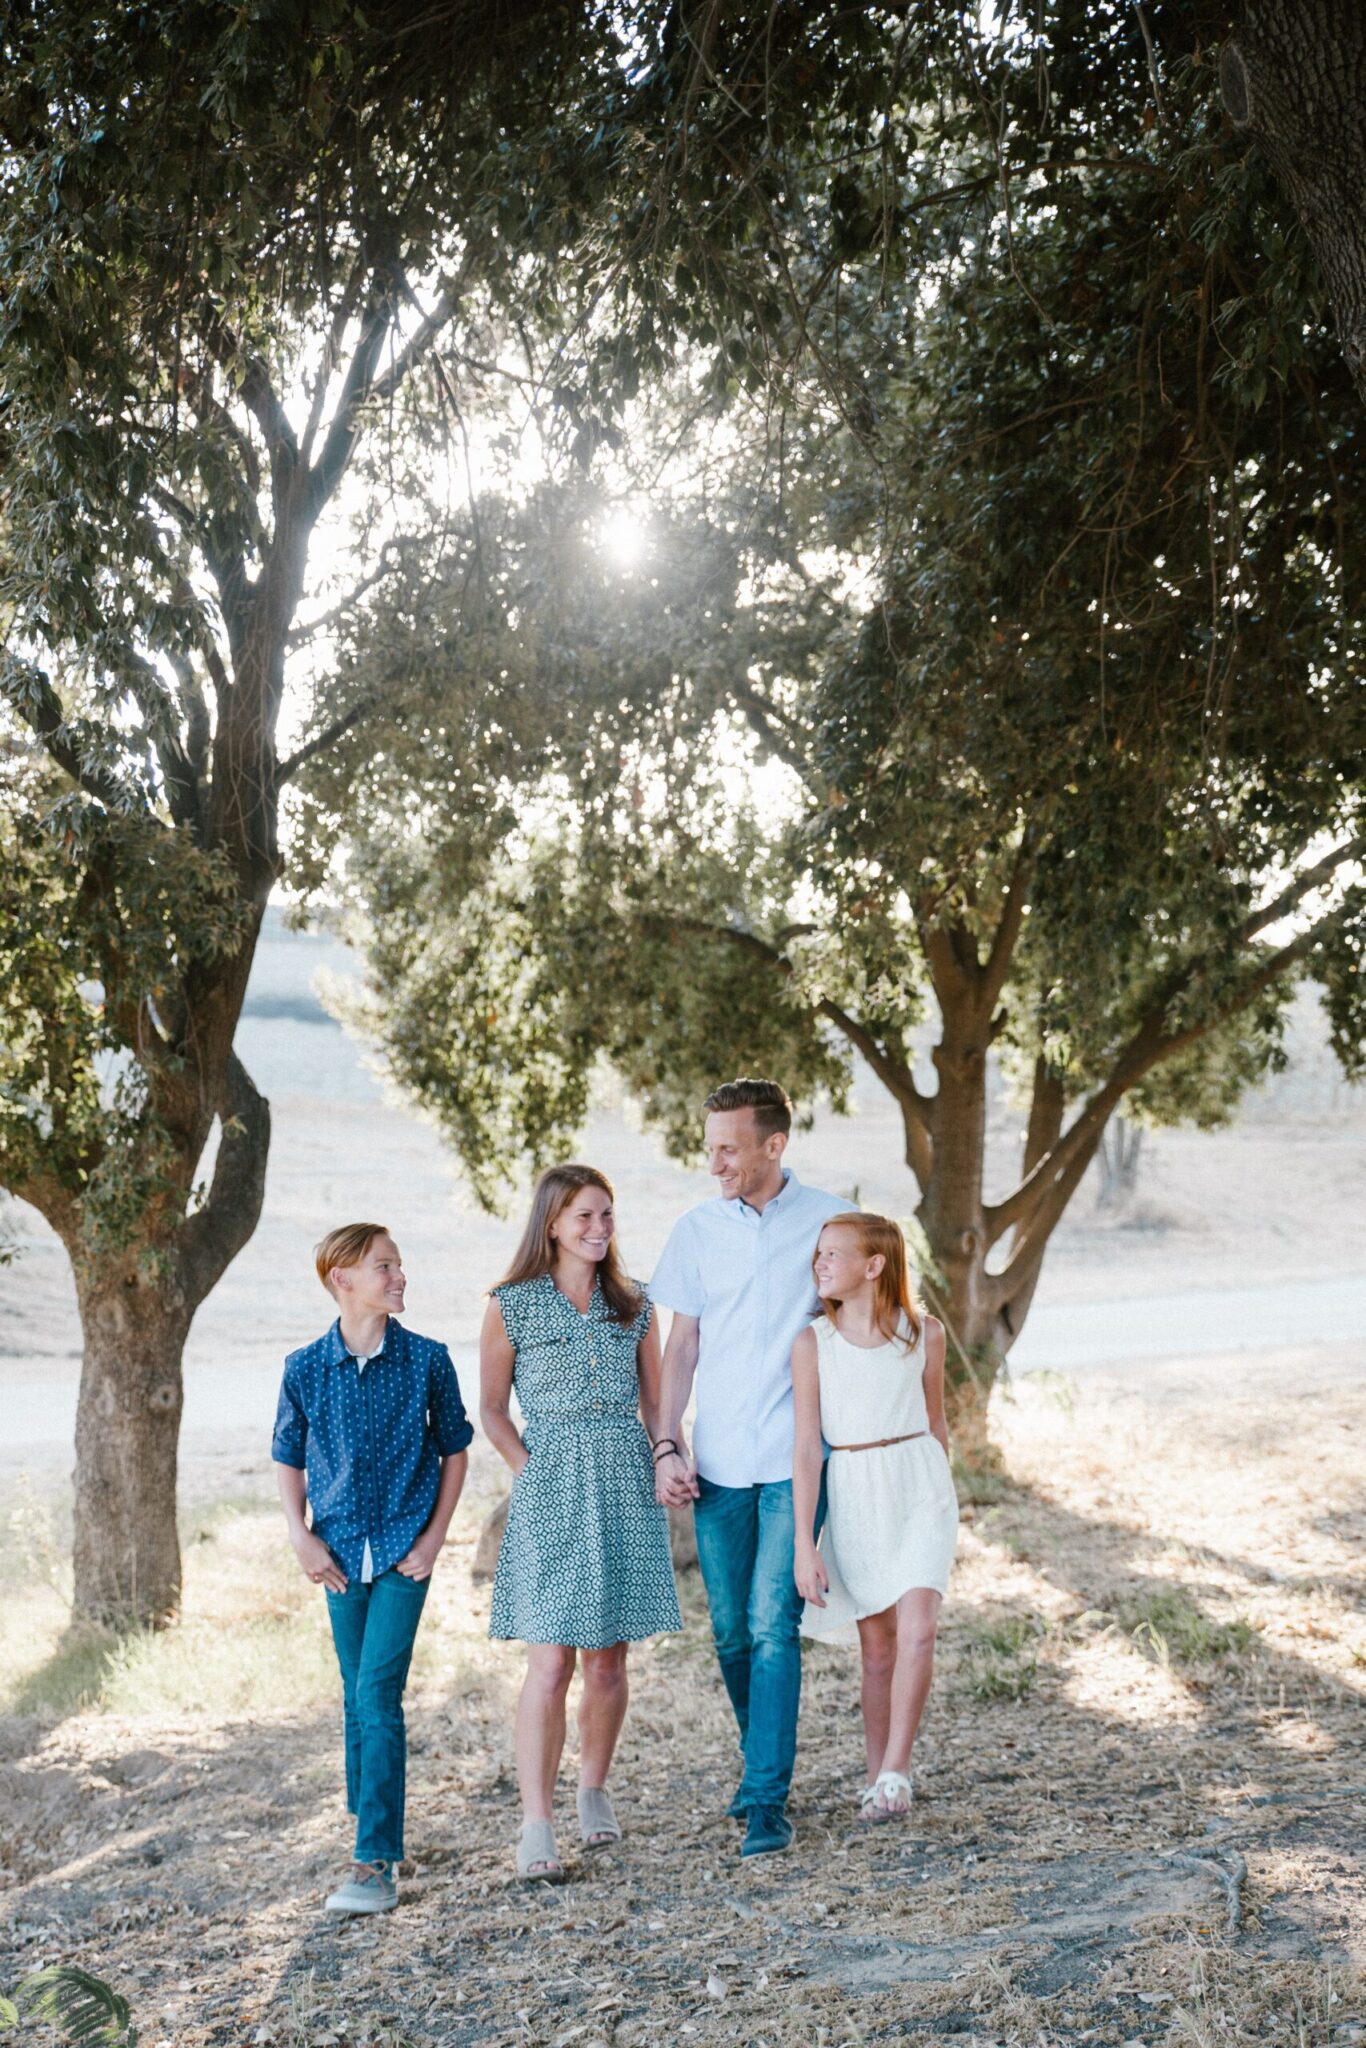 A family of four walking hand in hand under the shade of trees on a sunny day, discussing their recent visit to the Dallas dentist.